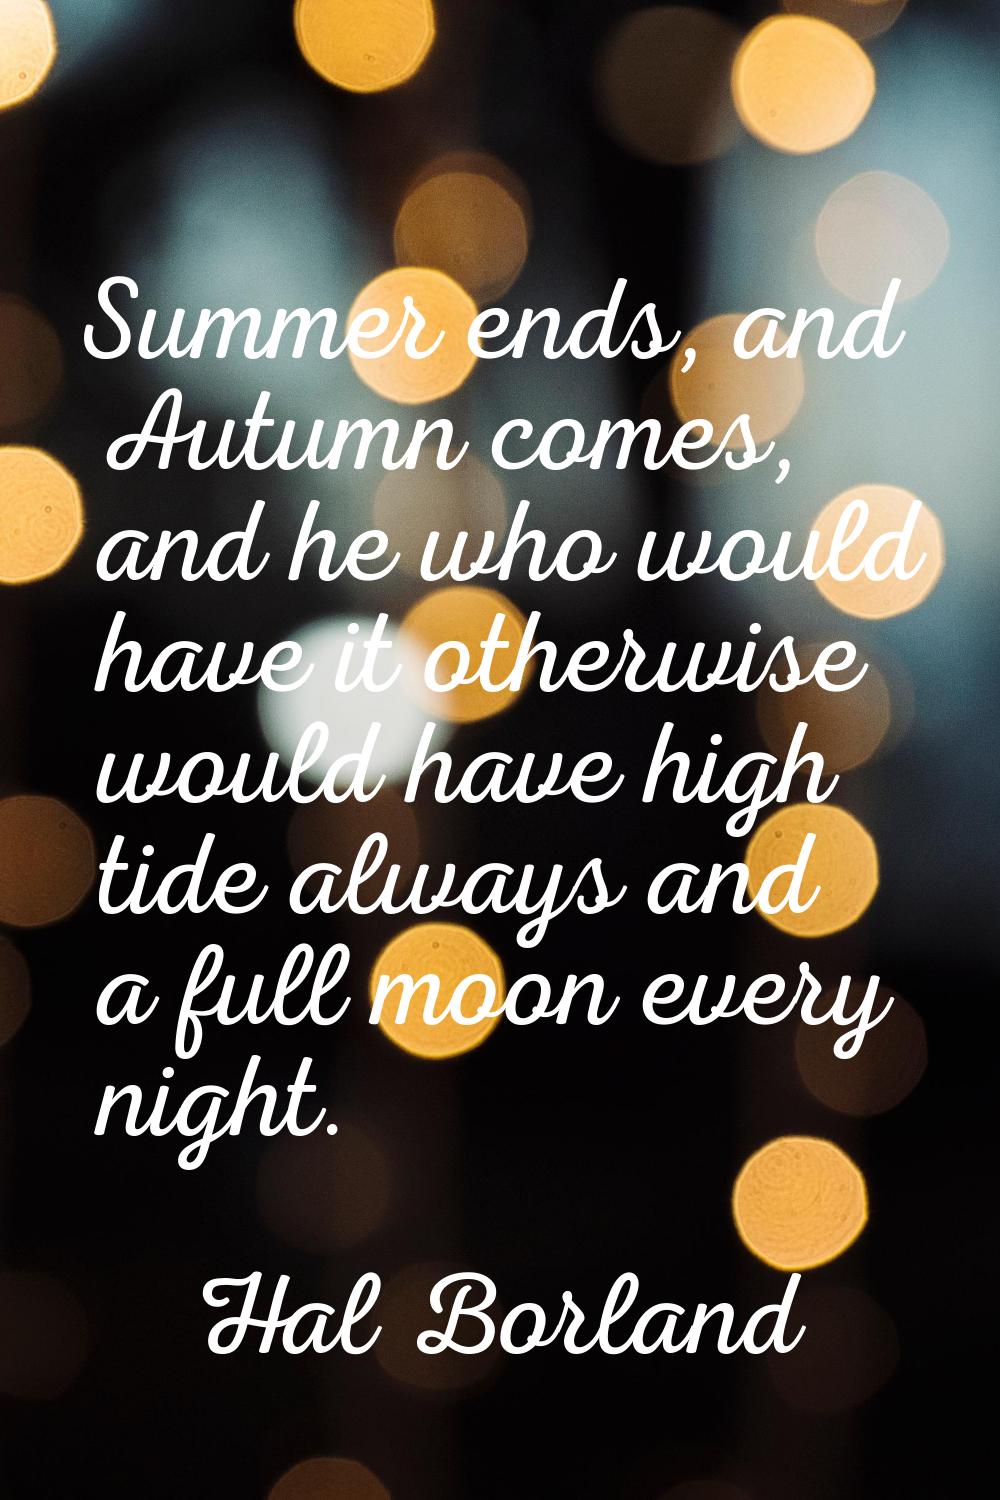 Summer ends, and Autumn comes, and he who would have it otherwise would have high tide always and a